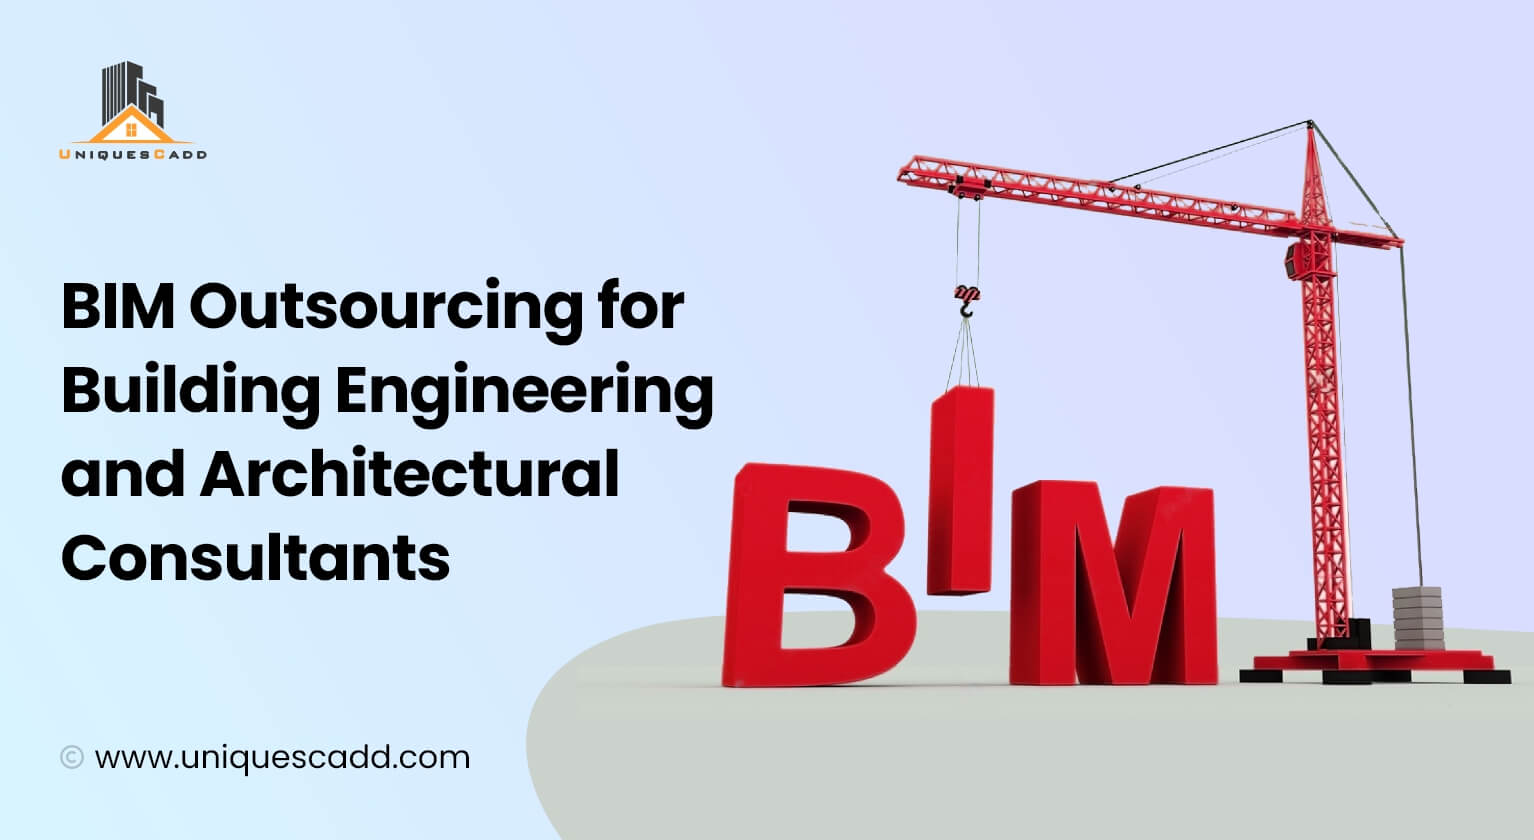 BIM Outsourcing for Building Engineering and Architectural Consultants - UniquesCadd